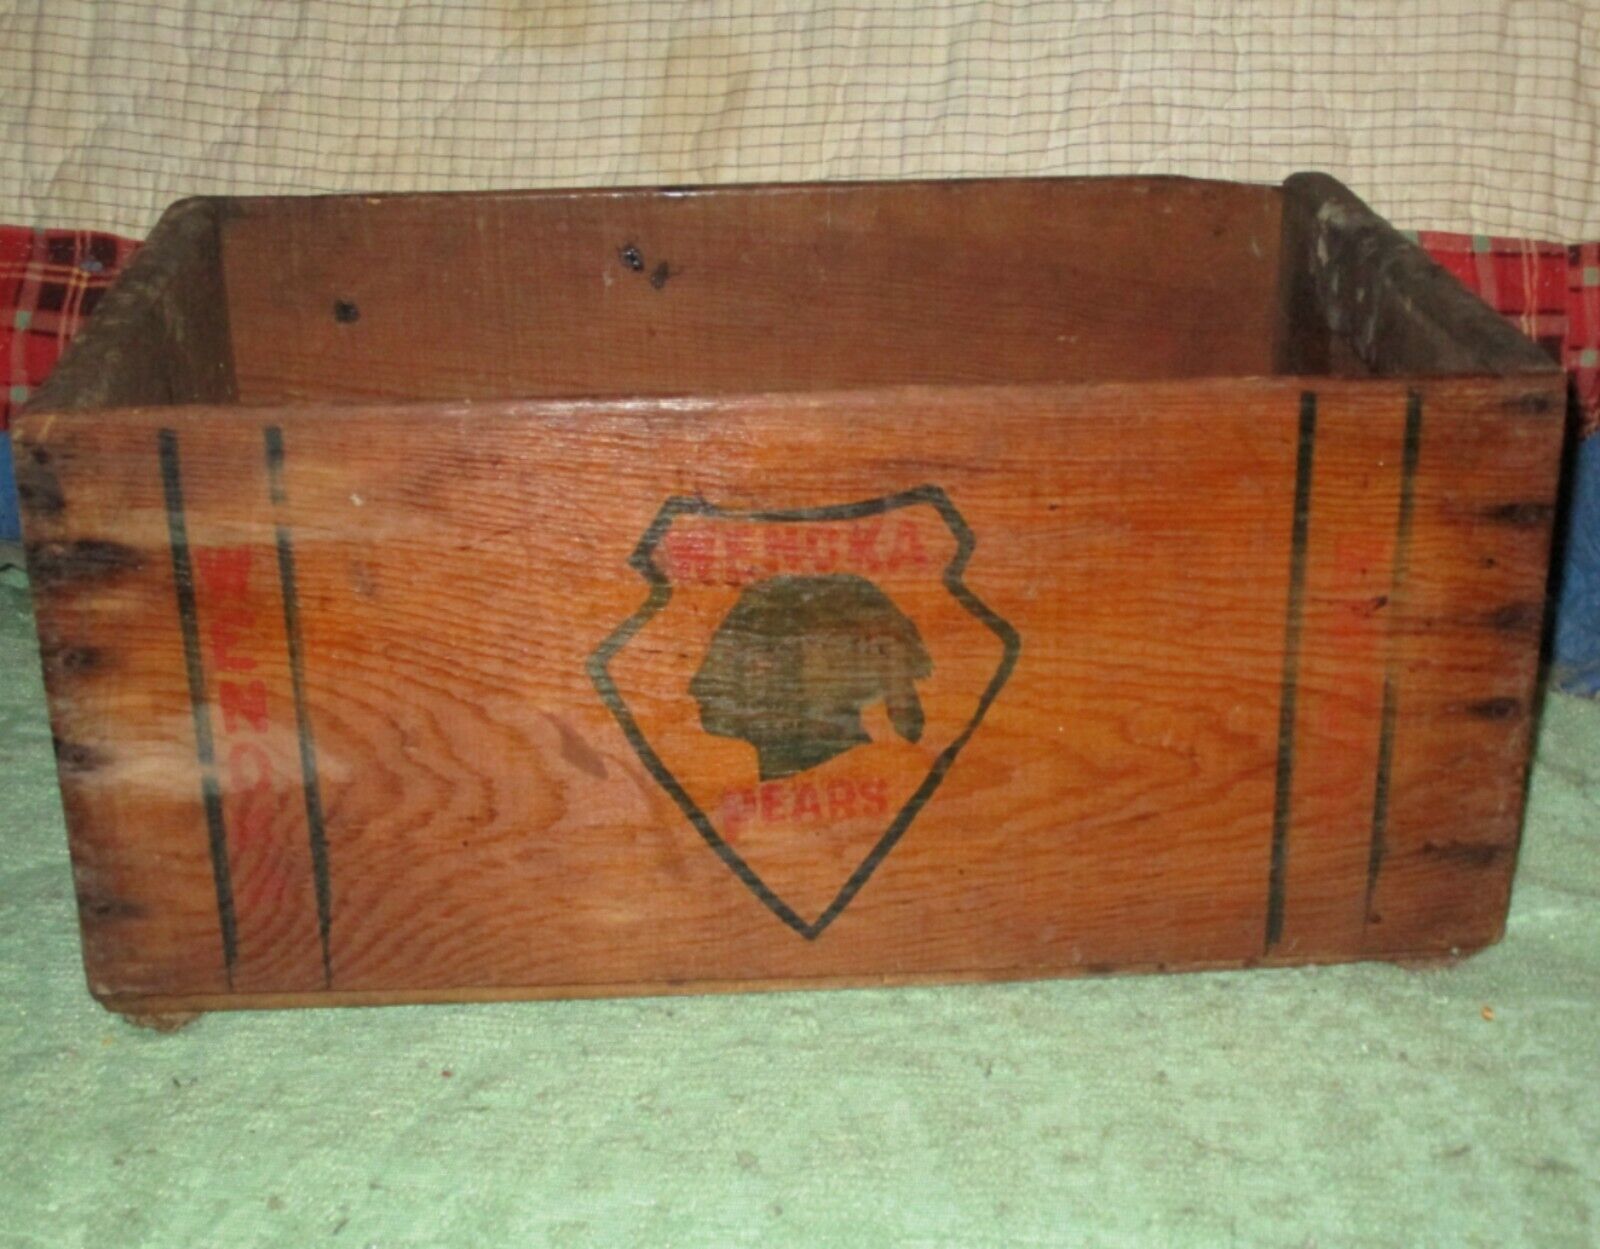 RARE Antique WENOKA PEARS FRUIT CRATE Indian Full Size Vintage Shipping Box 